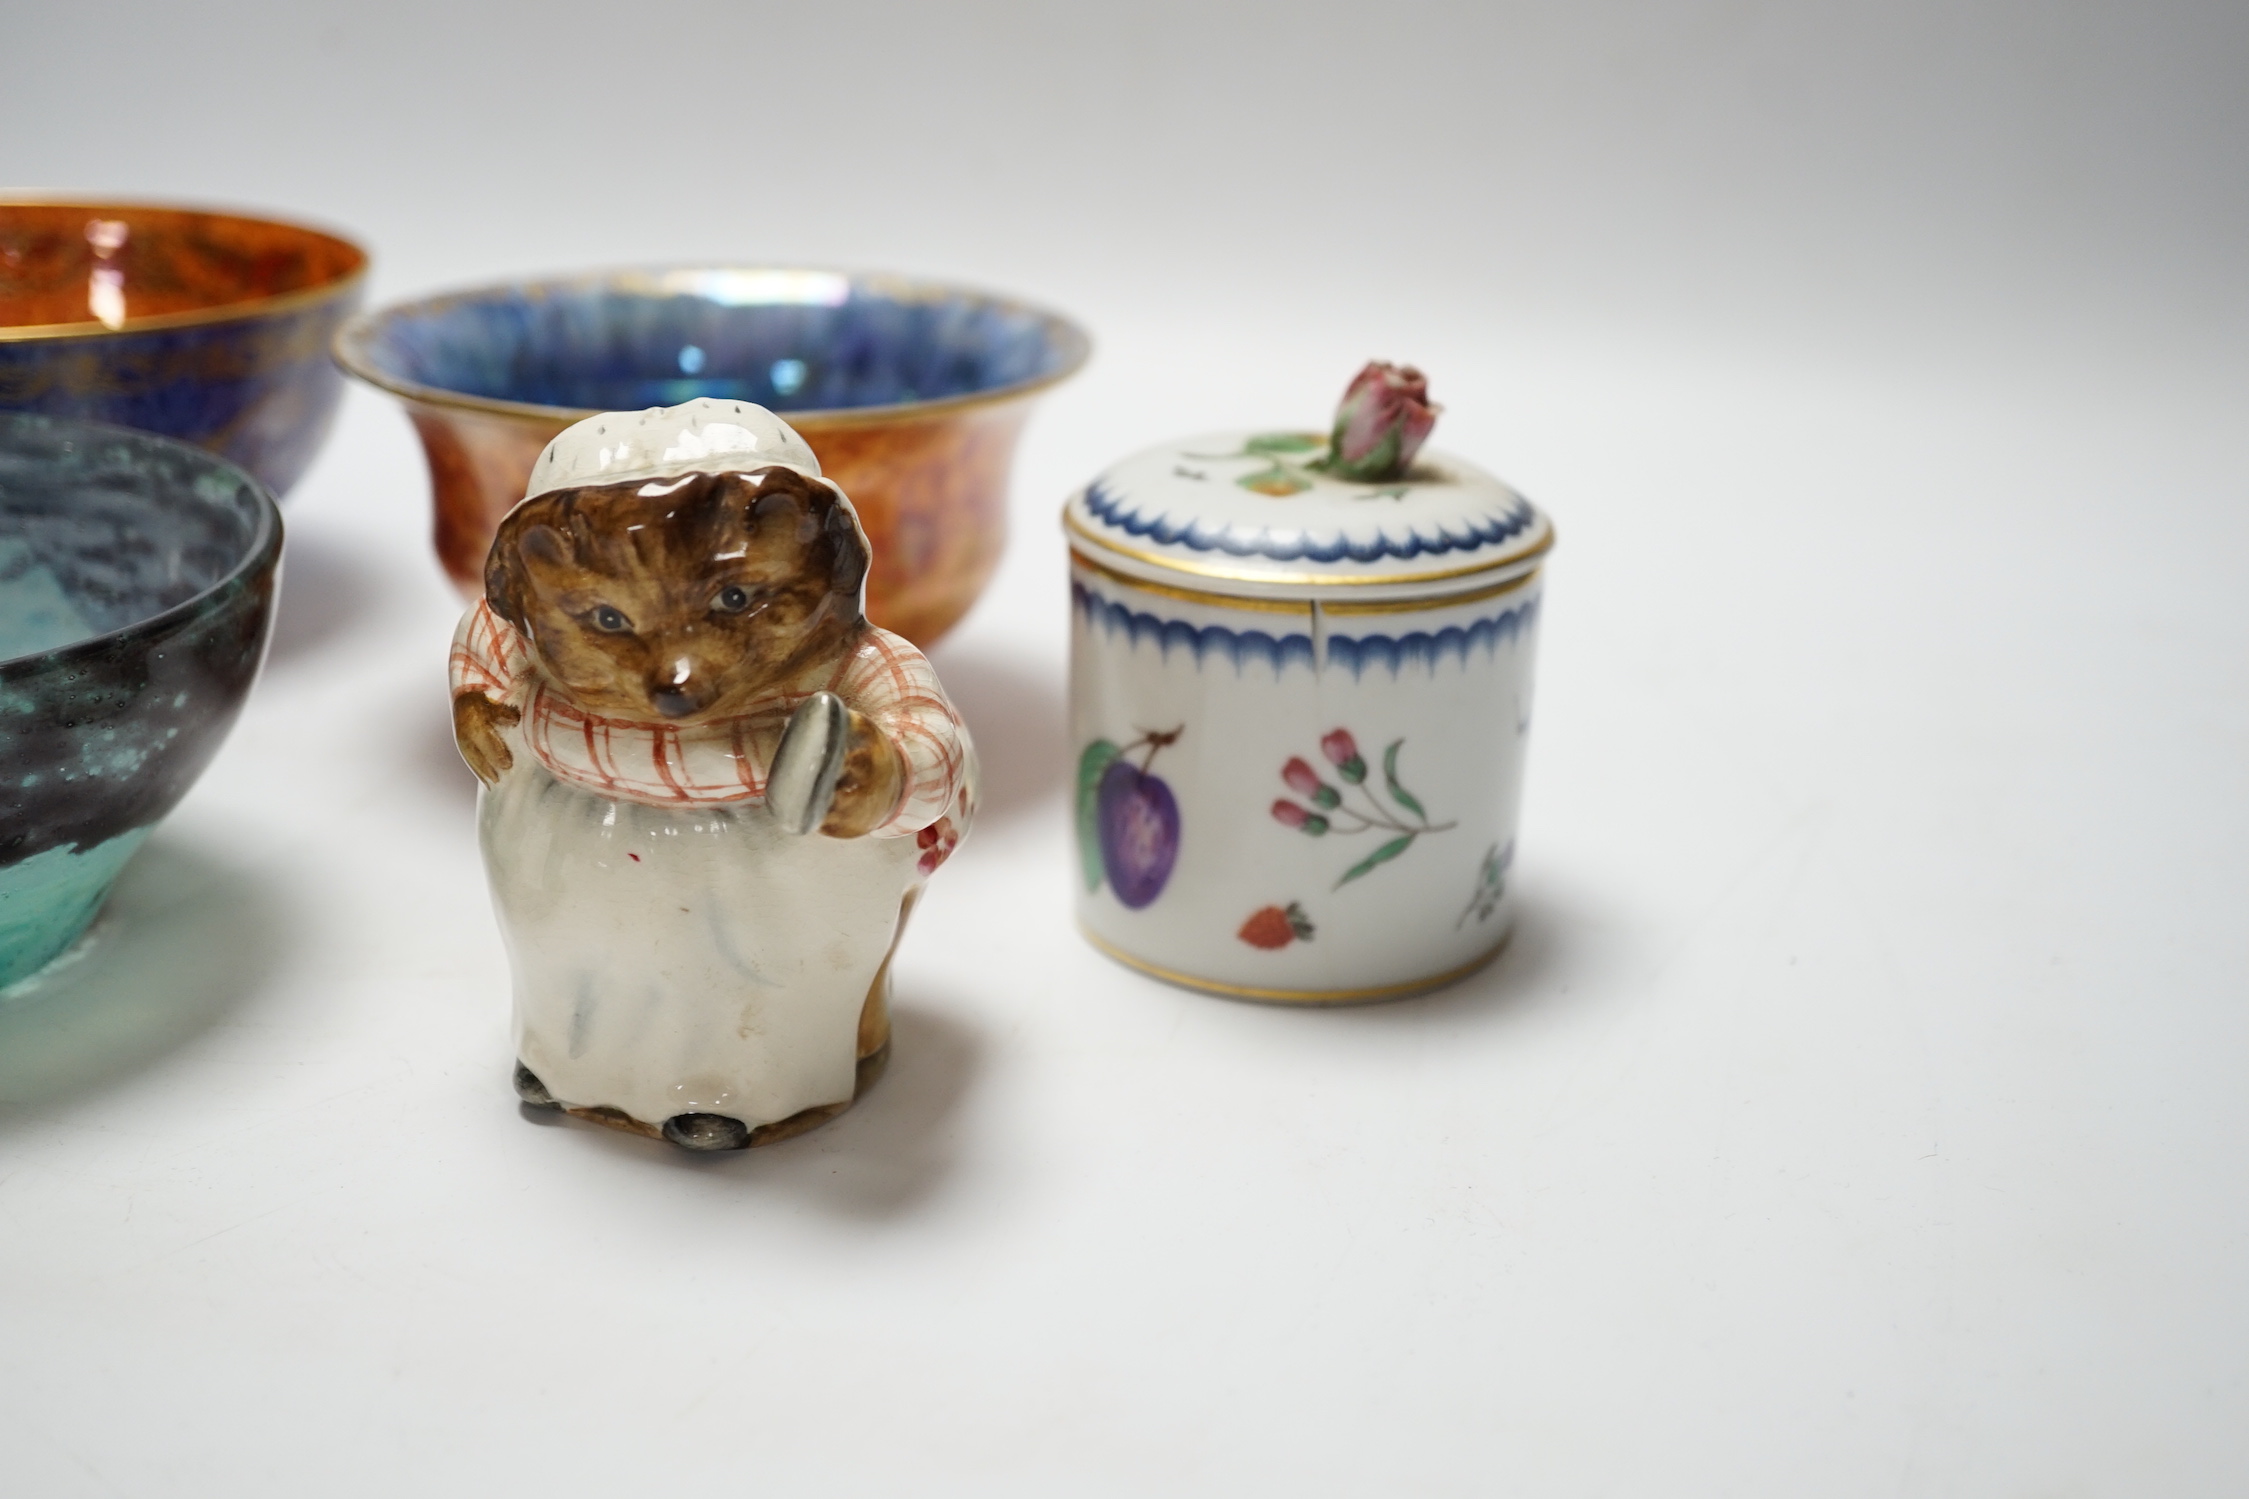 Two Wedgwood lustre bowls, a Vasart type glass bowl and two other items comprising Beatrix potter figure and Italian porcelain pot and cover, largest 13cm in diameter